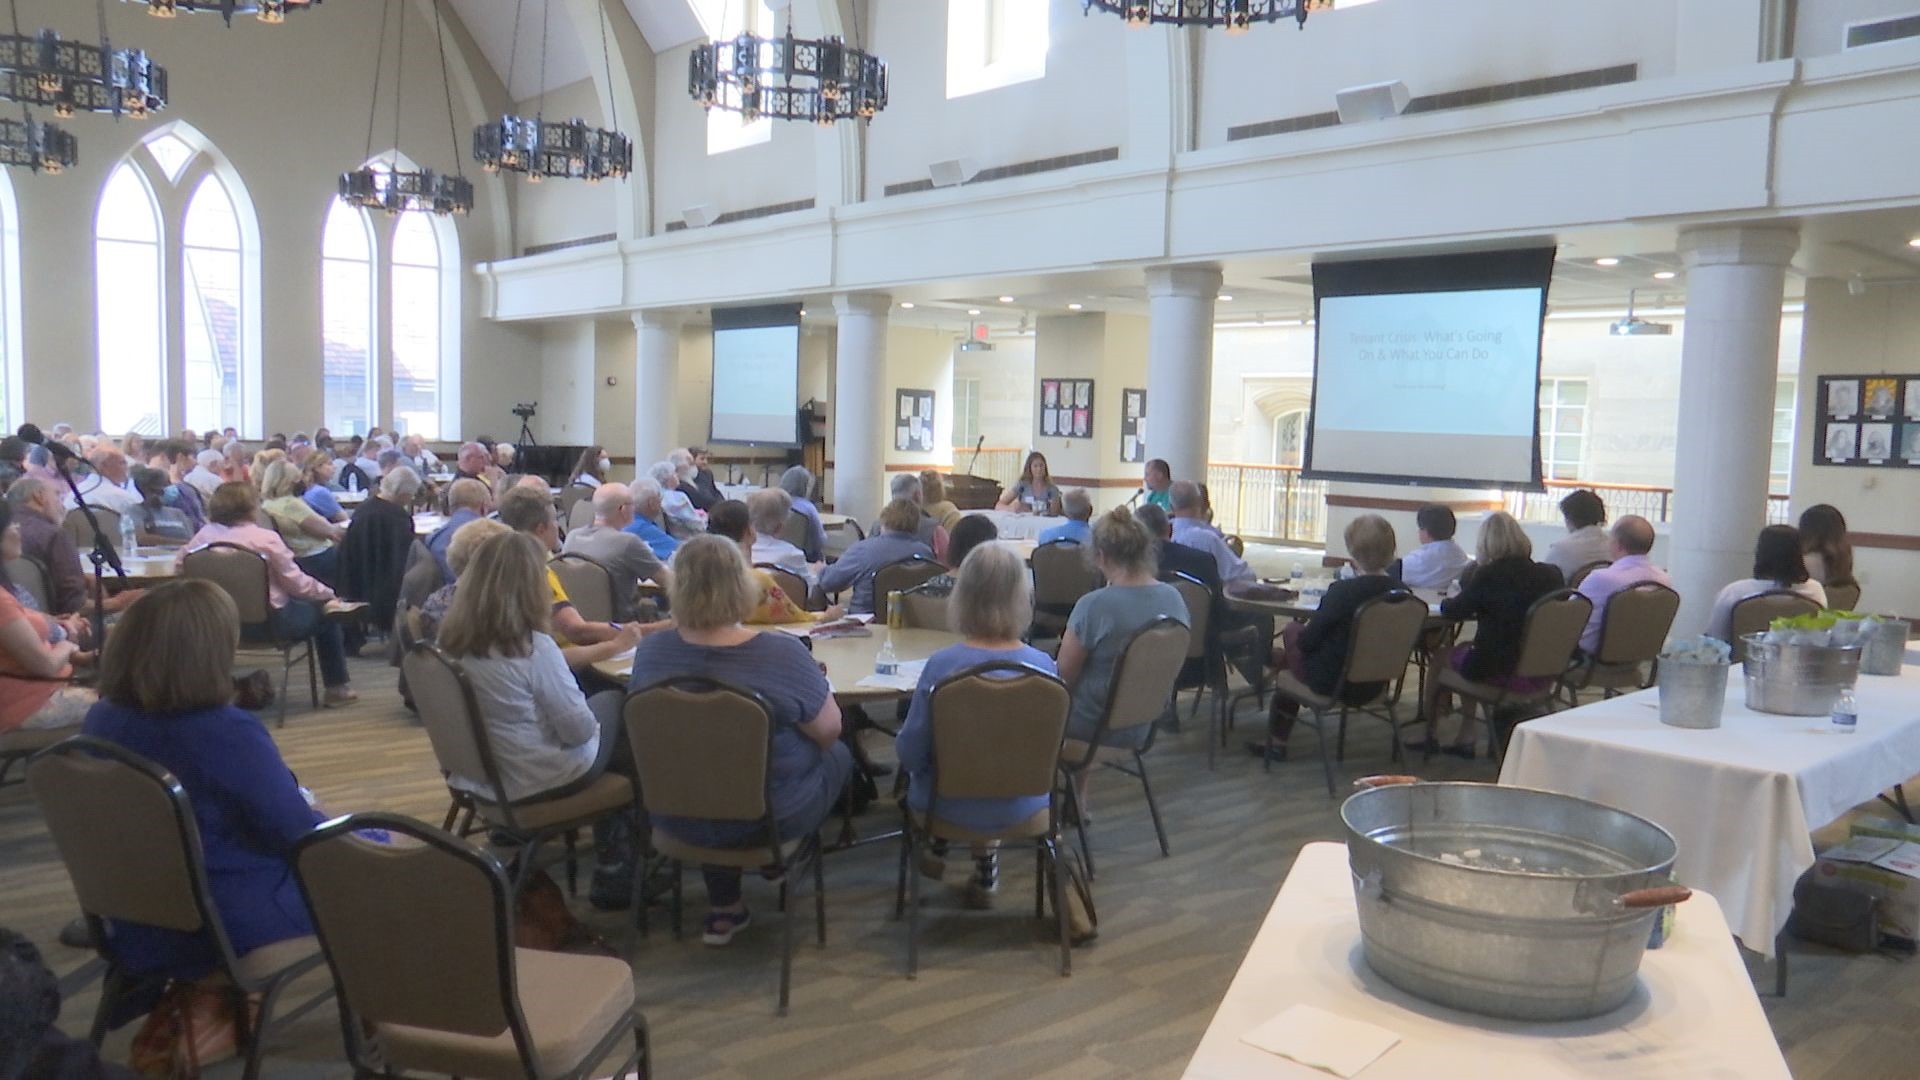 Fair housing advocates gathered at Second Presbyterian Church on Sunday to discuss the housing crisis happening across the city.